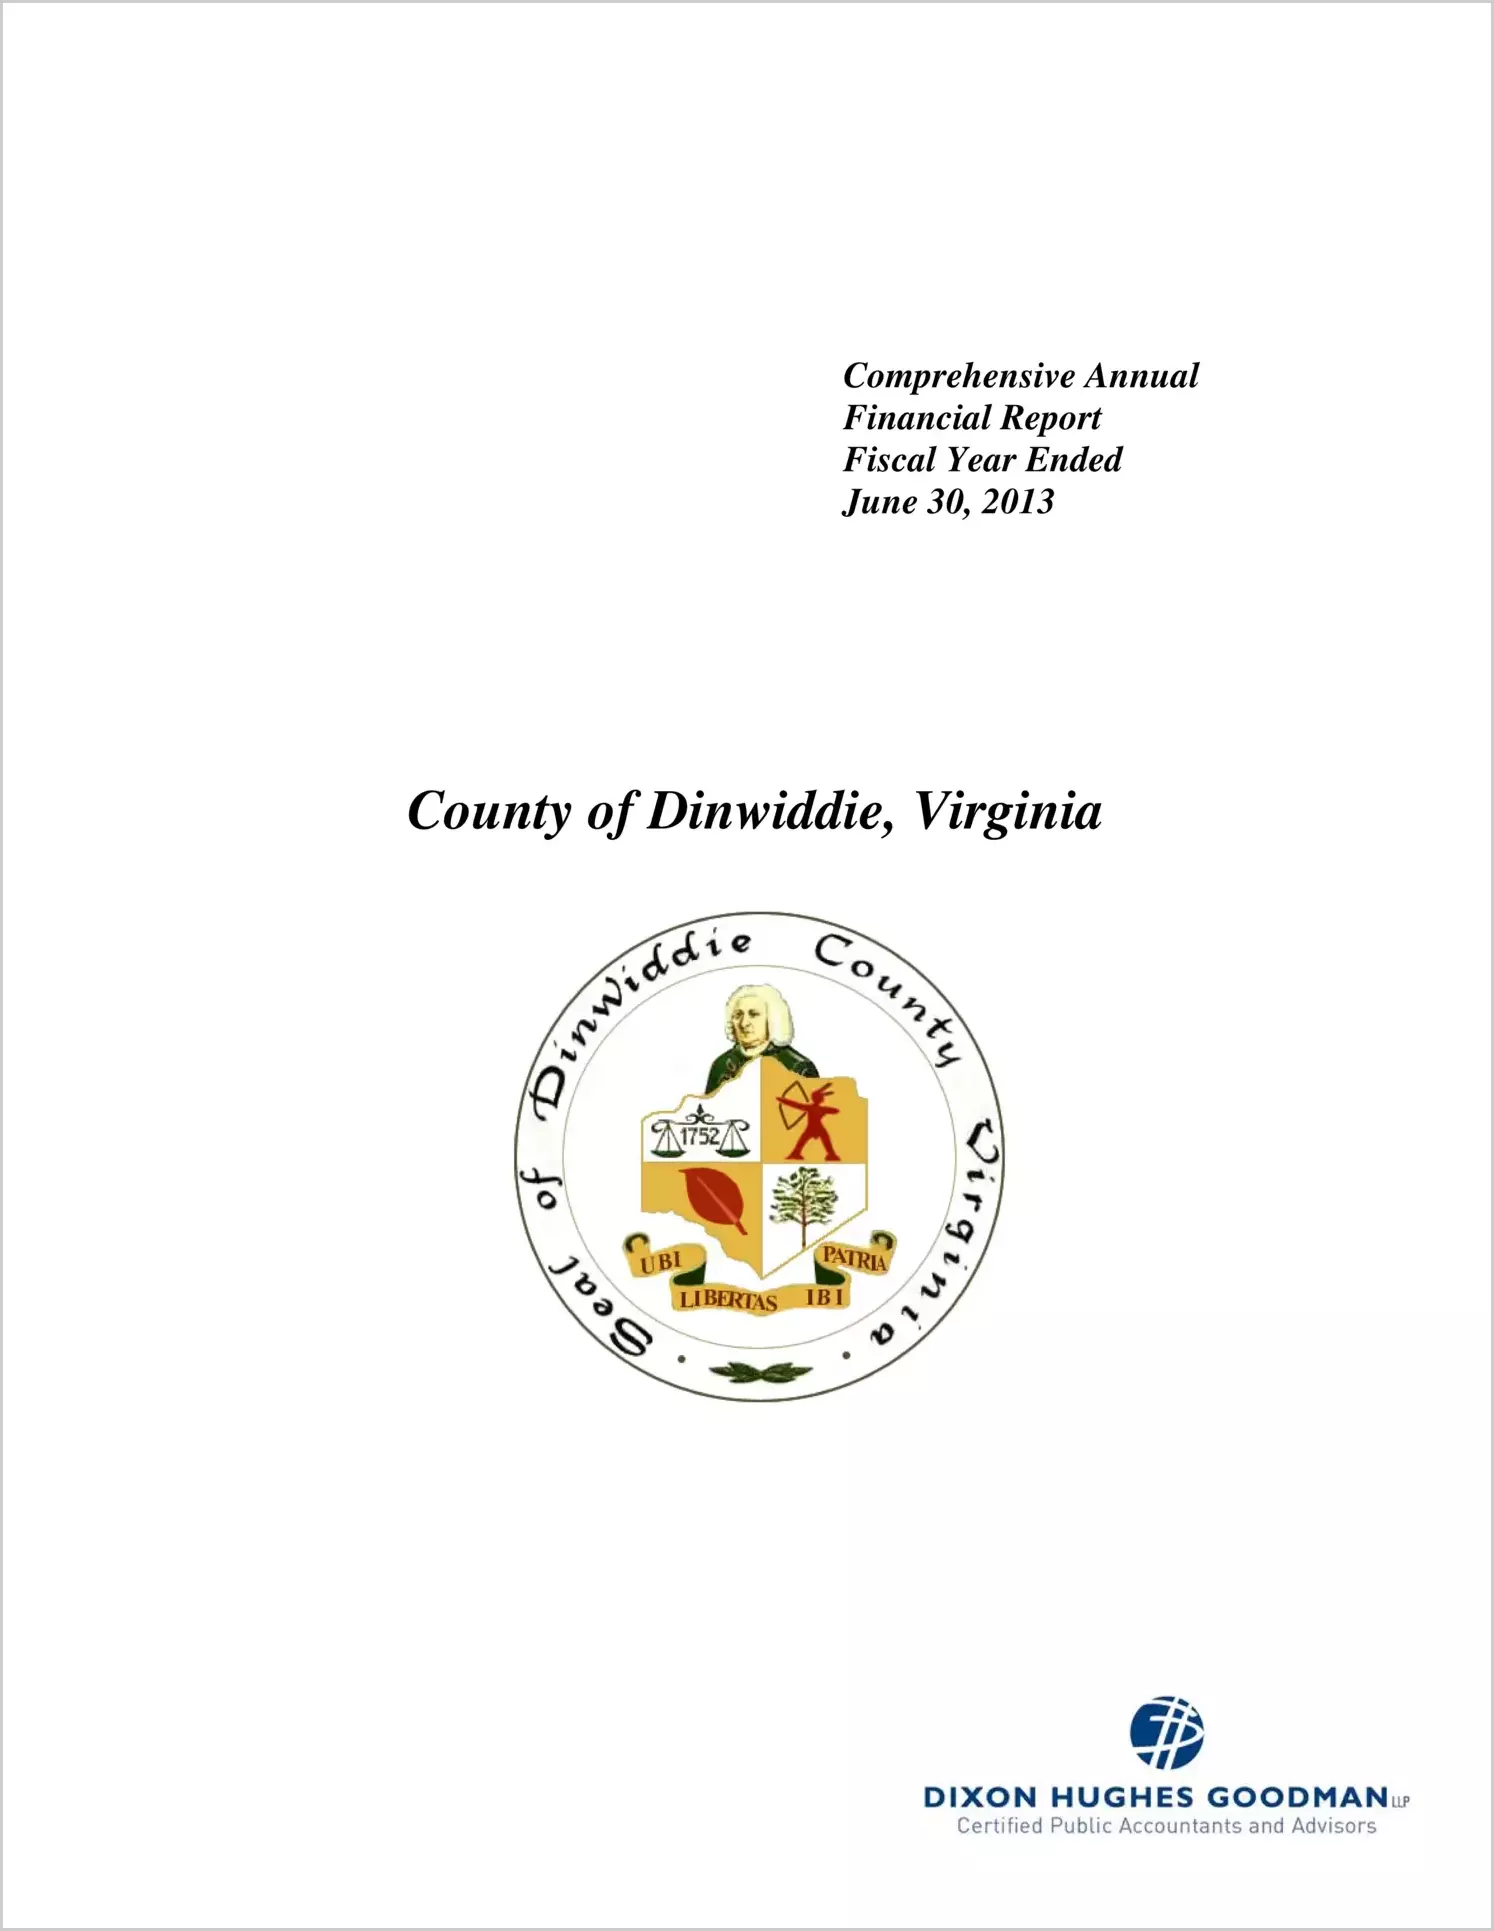 2013 Annual Financial Report for County of Dinwiddie